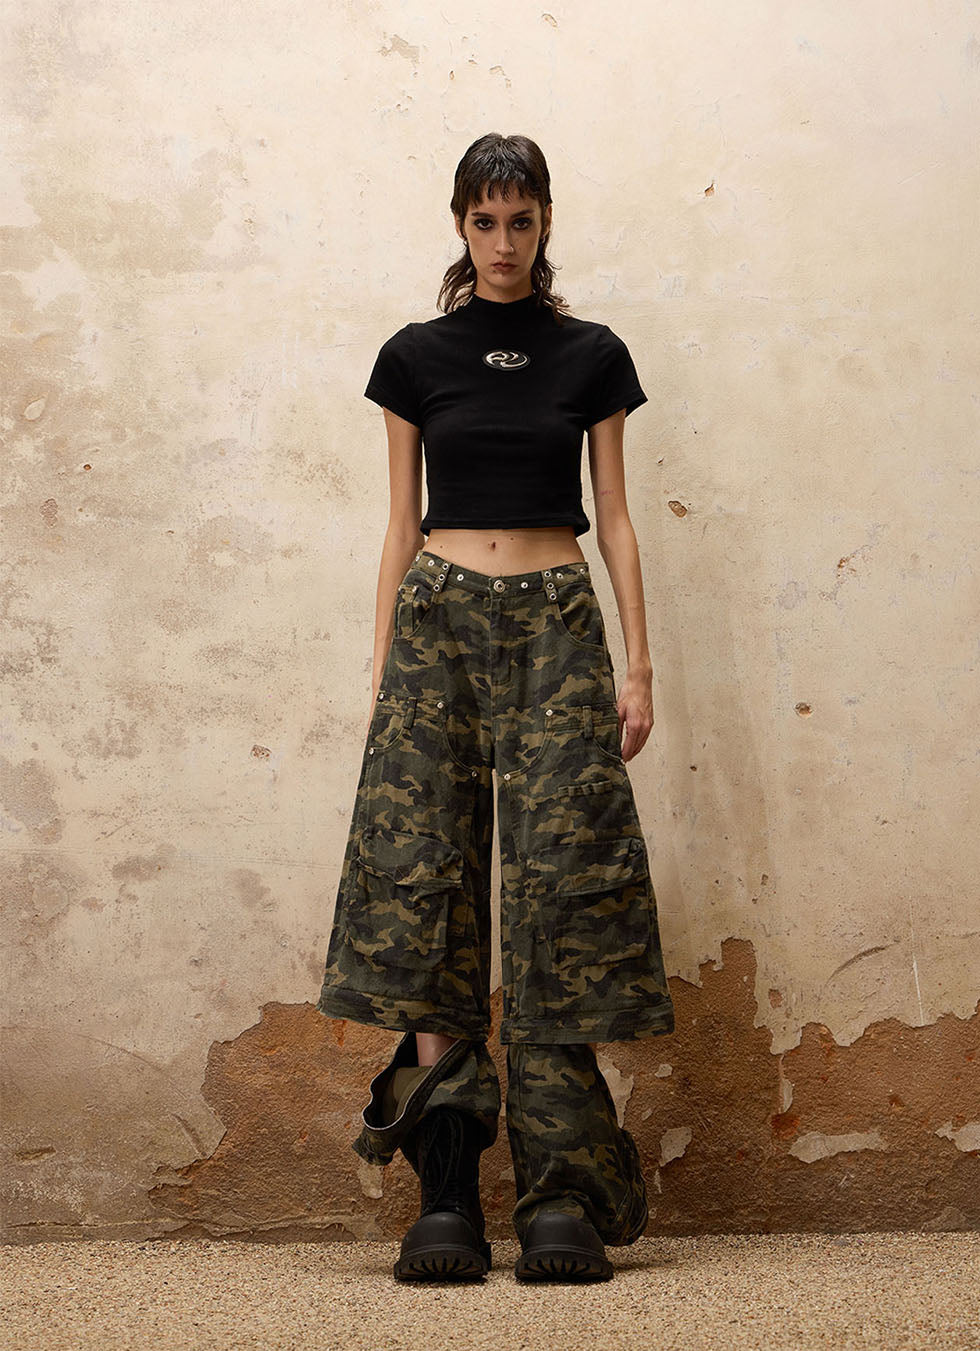 Three-in-one cargo pants